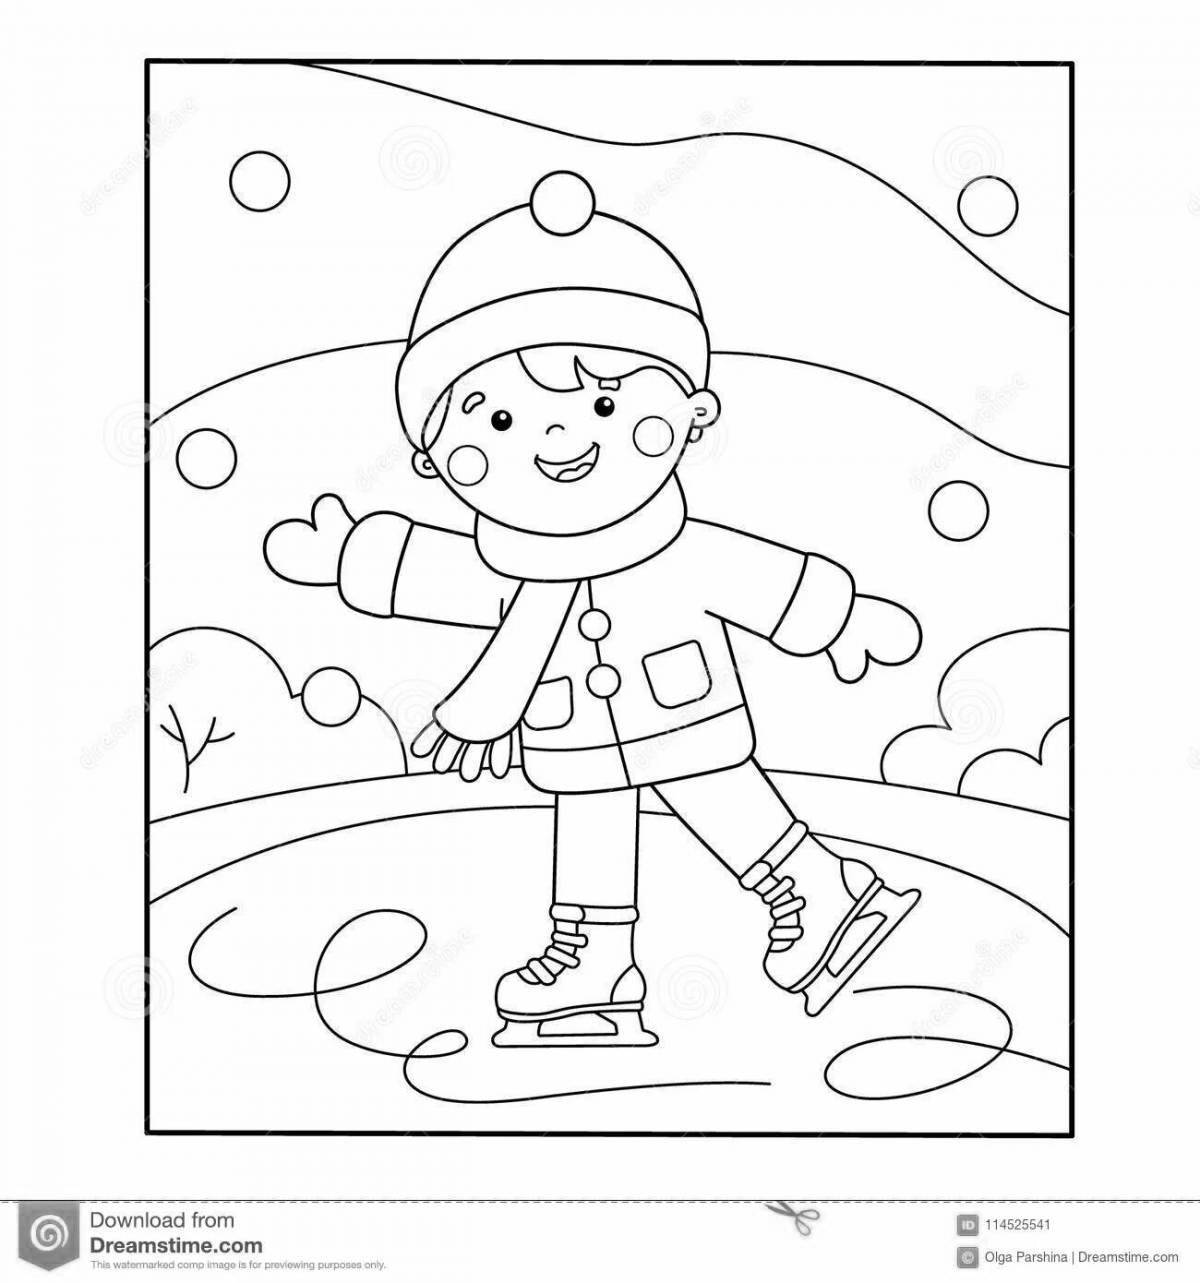 Playful winter sports coloring page for kids